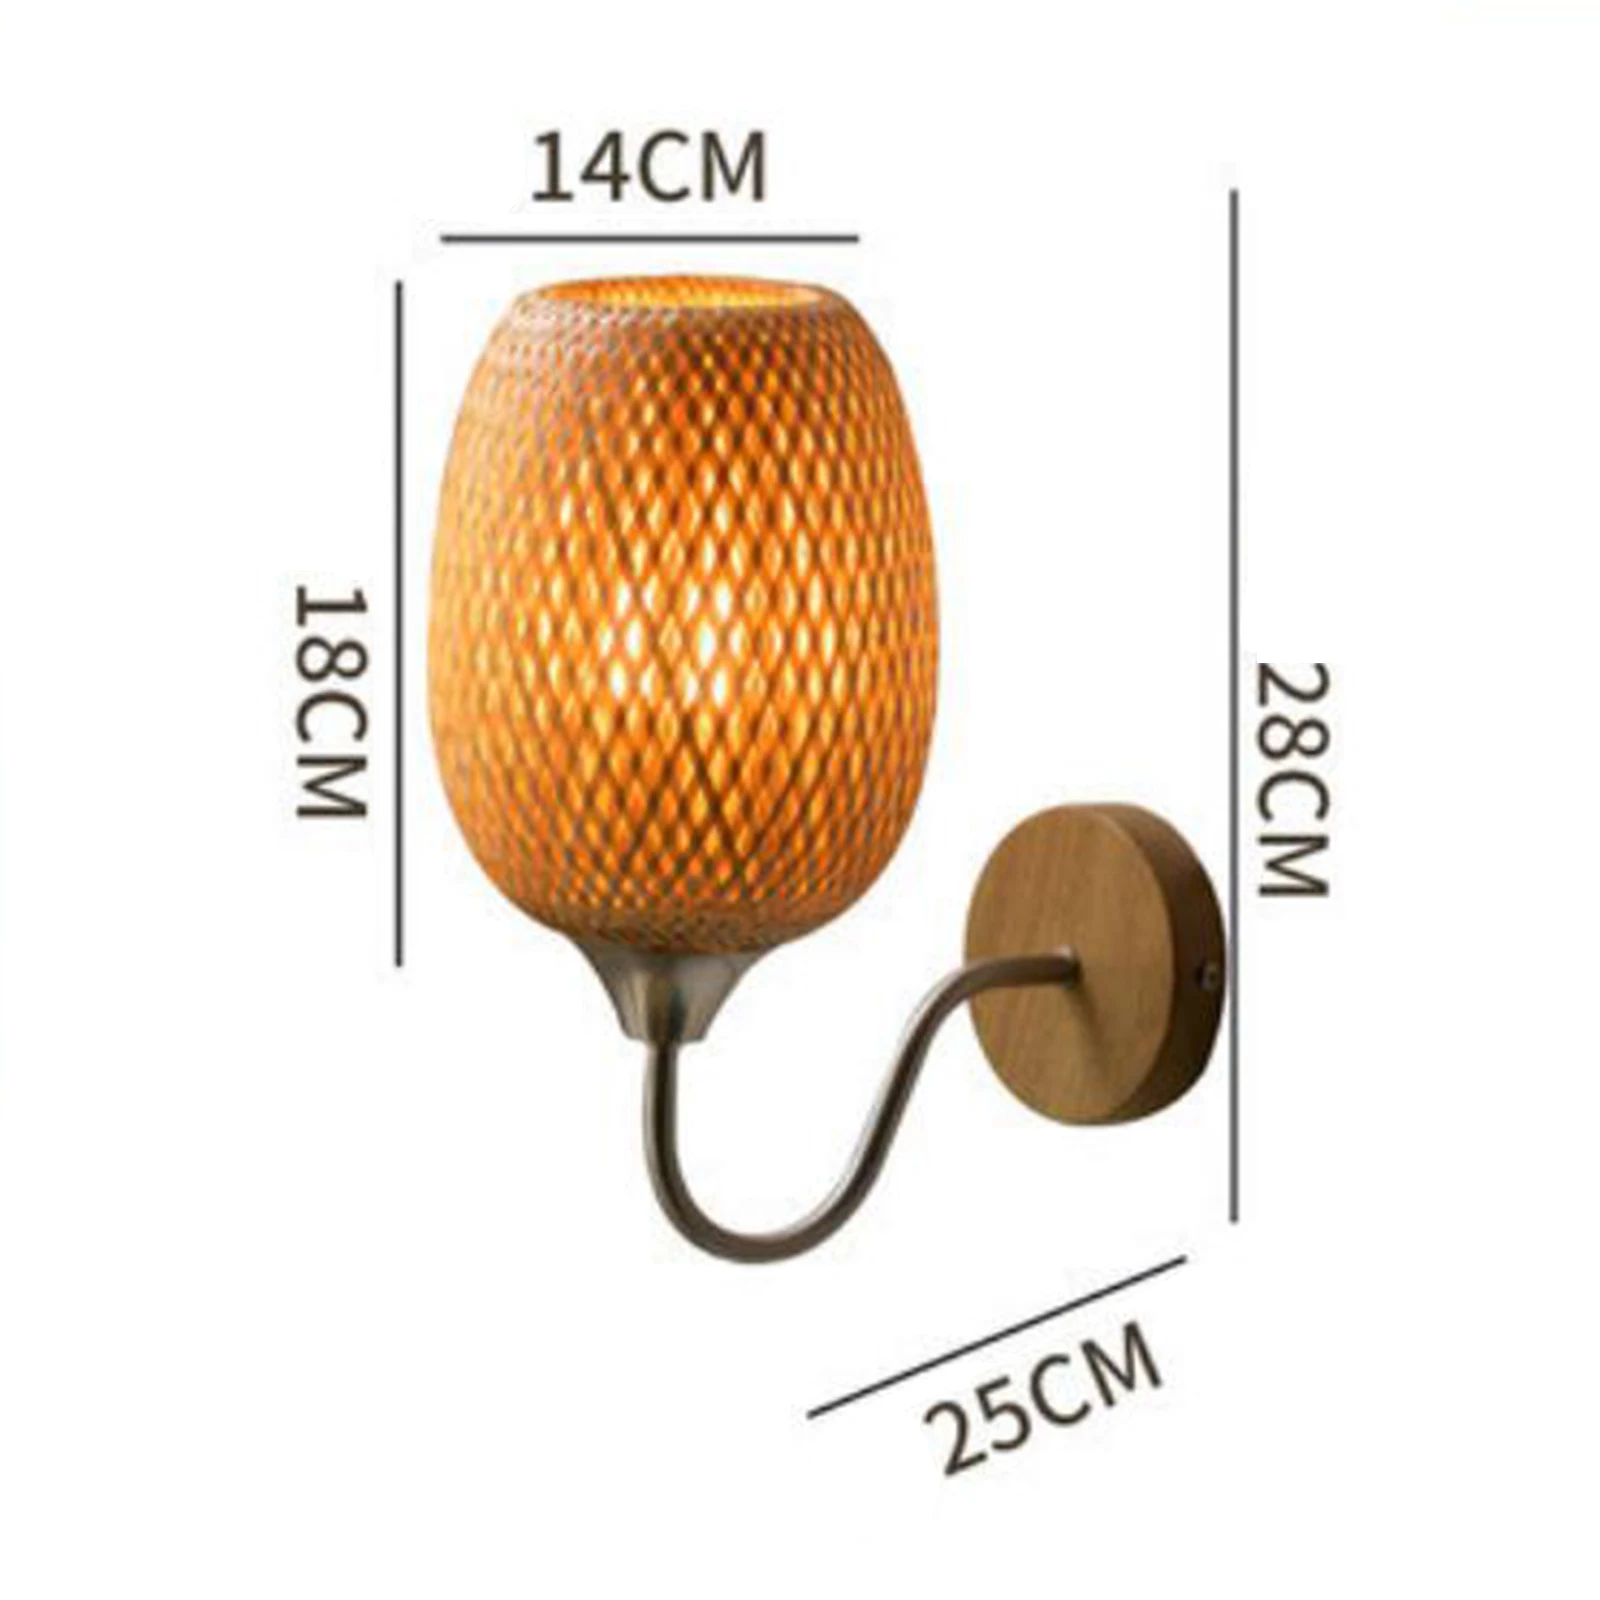 Rattan Bamboo Wall Sconce Light Fixture Vintage Wall Lamp Lighting Bedside Retro Lamp Industrial Decor Dining Room Bedroom